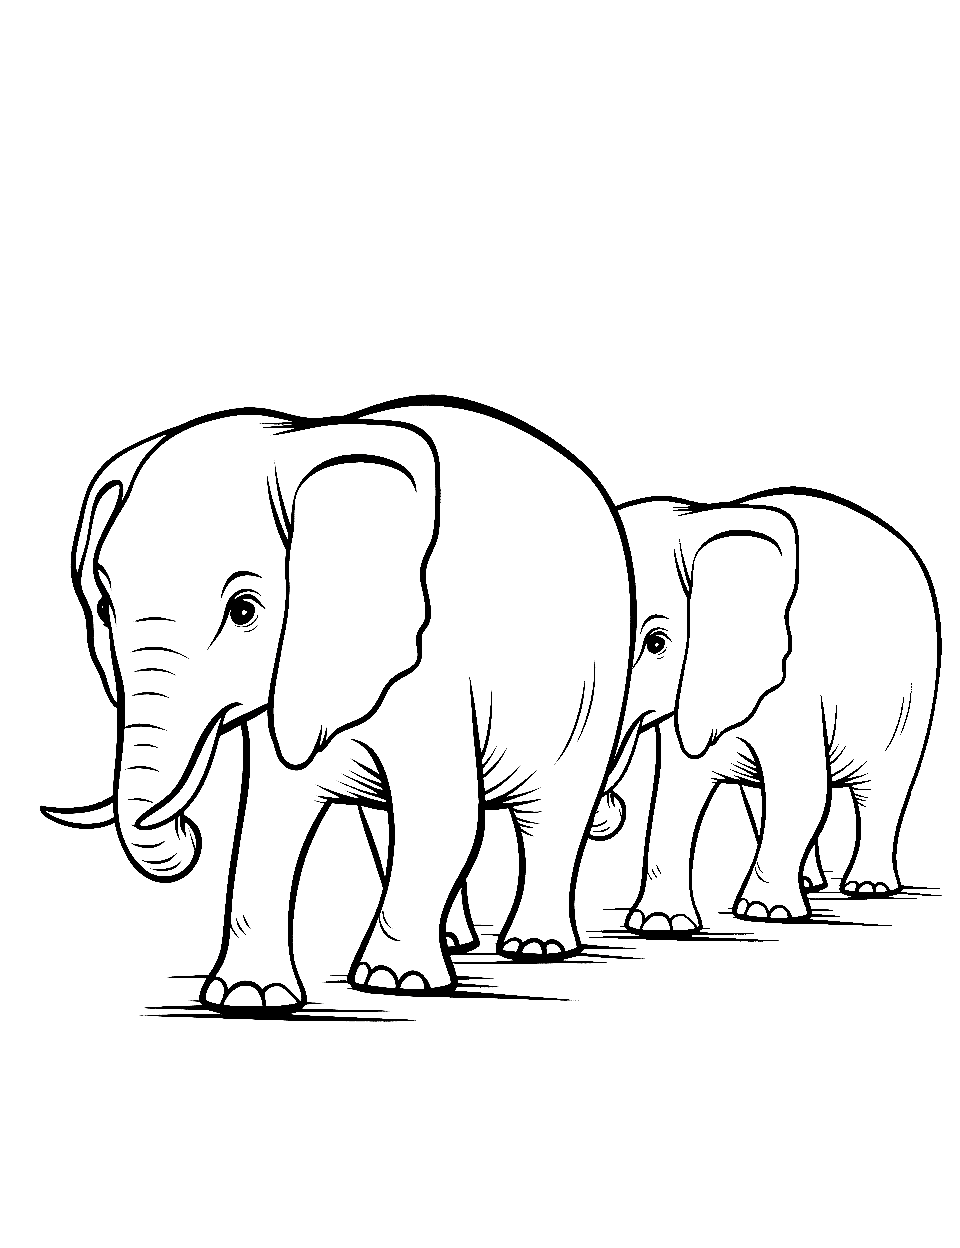 Preschool Elephant Parade Coloring Page - Several simple elephant drawings walking in a line, suitable for preschool kids.